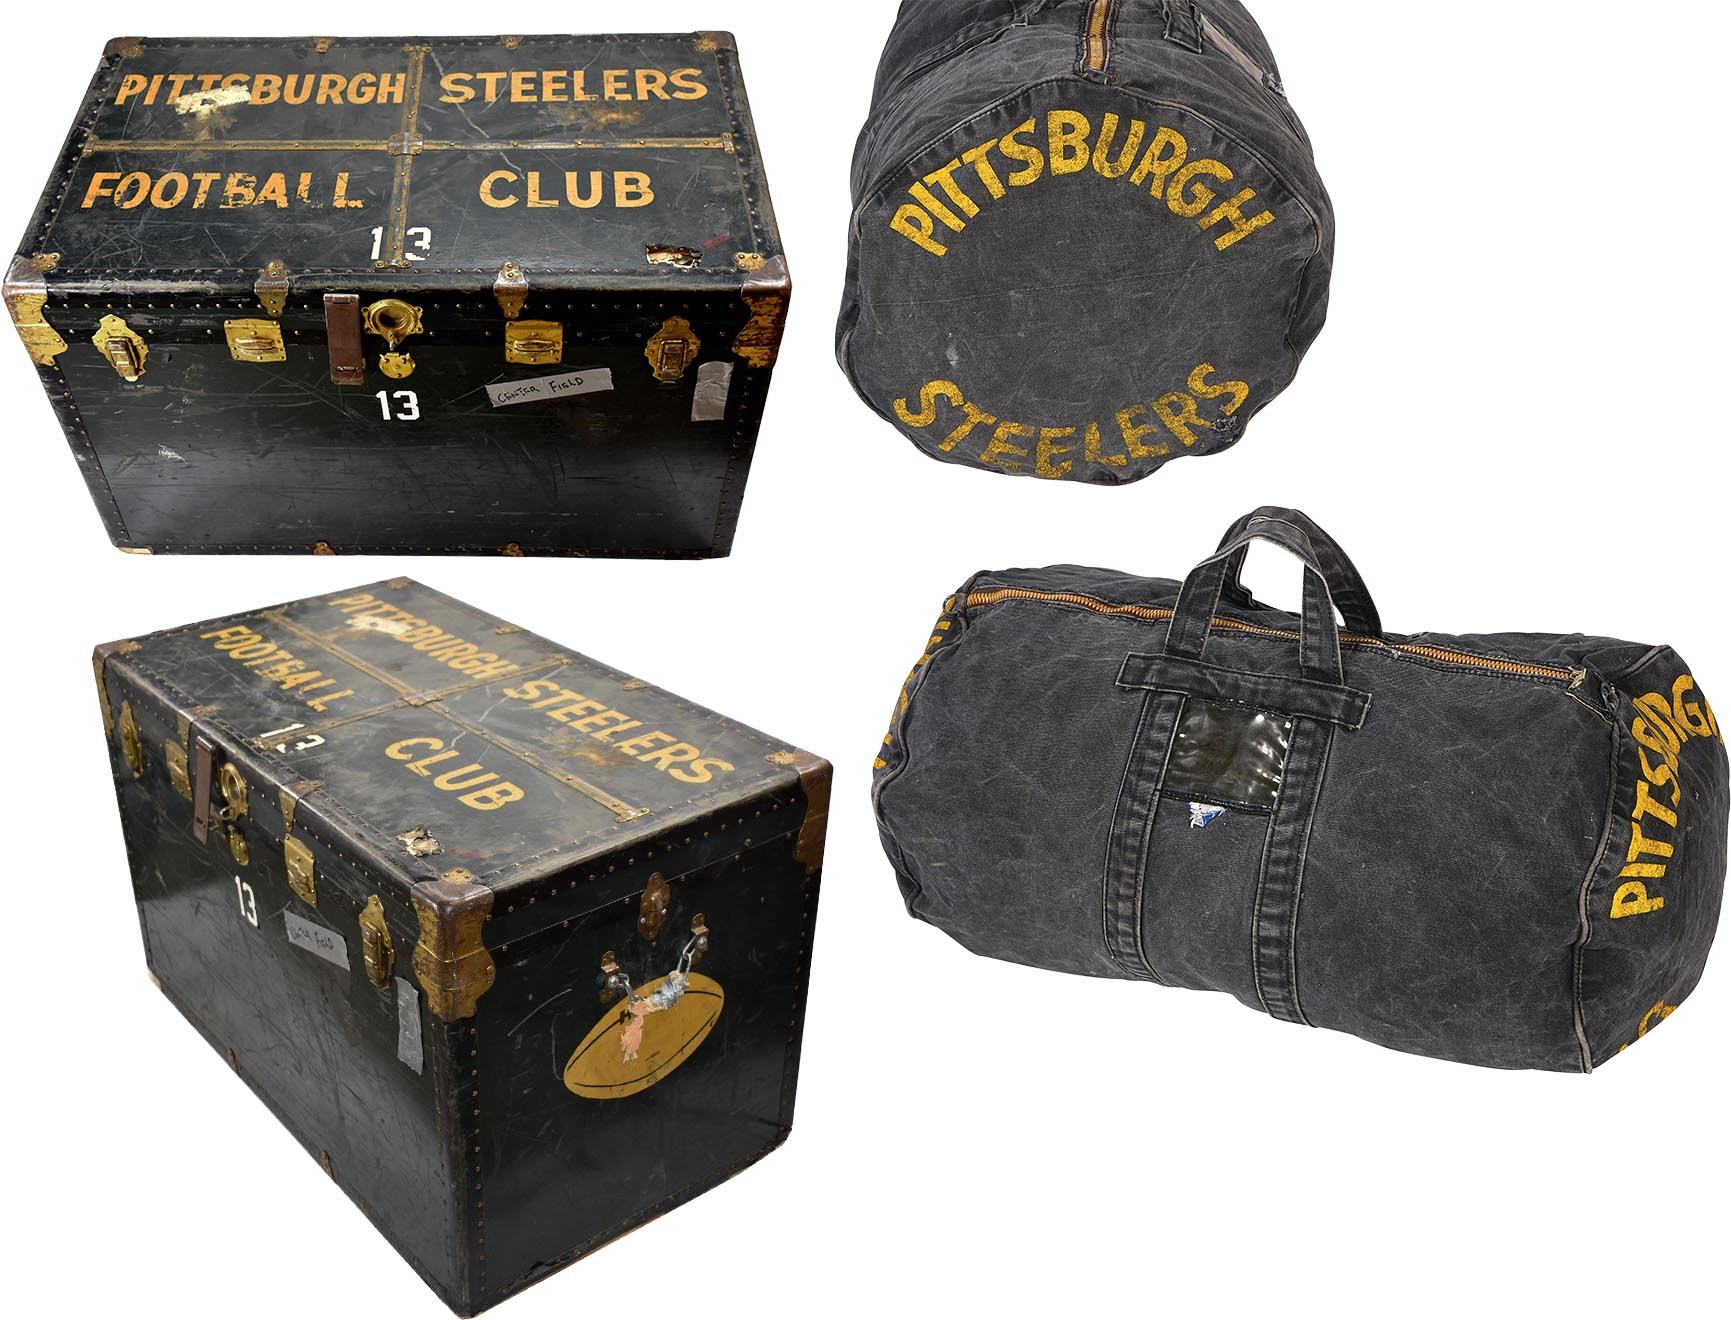 Vintage Pittsburgh Steelers Equipment Trunk and Duffle Bag